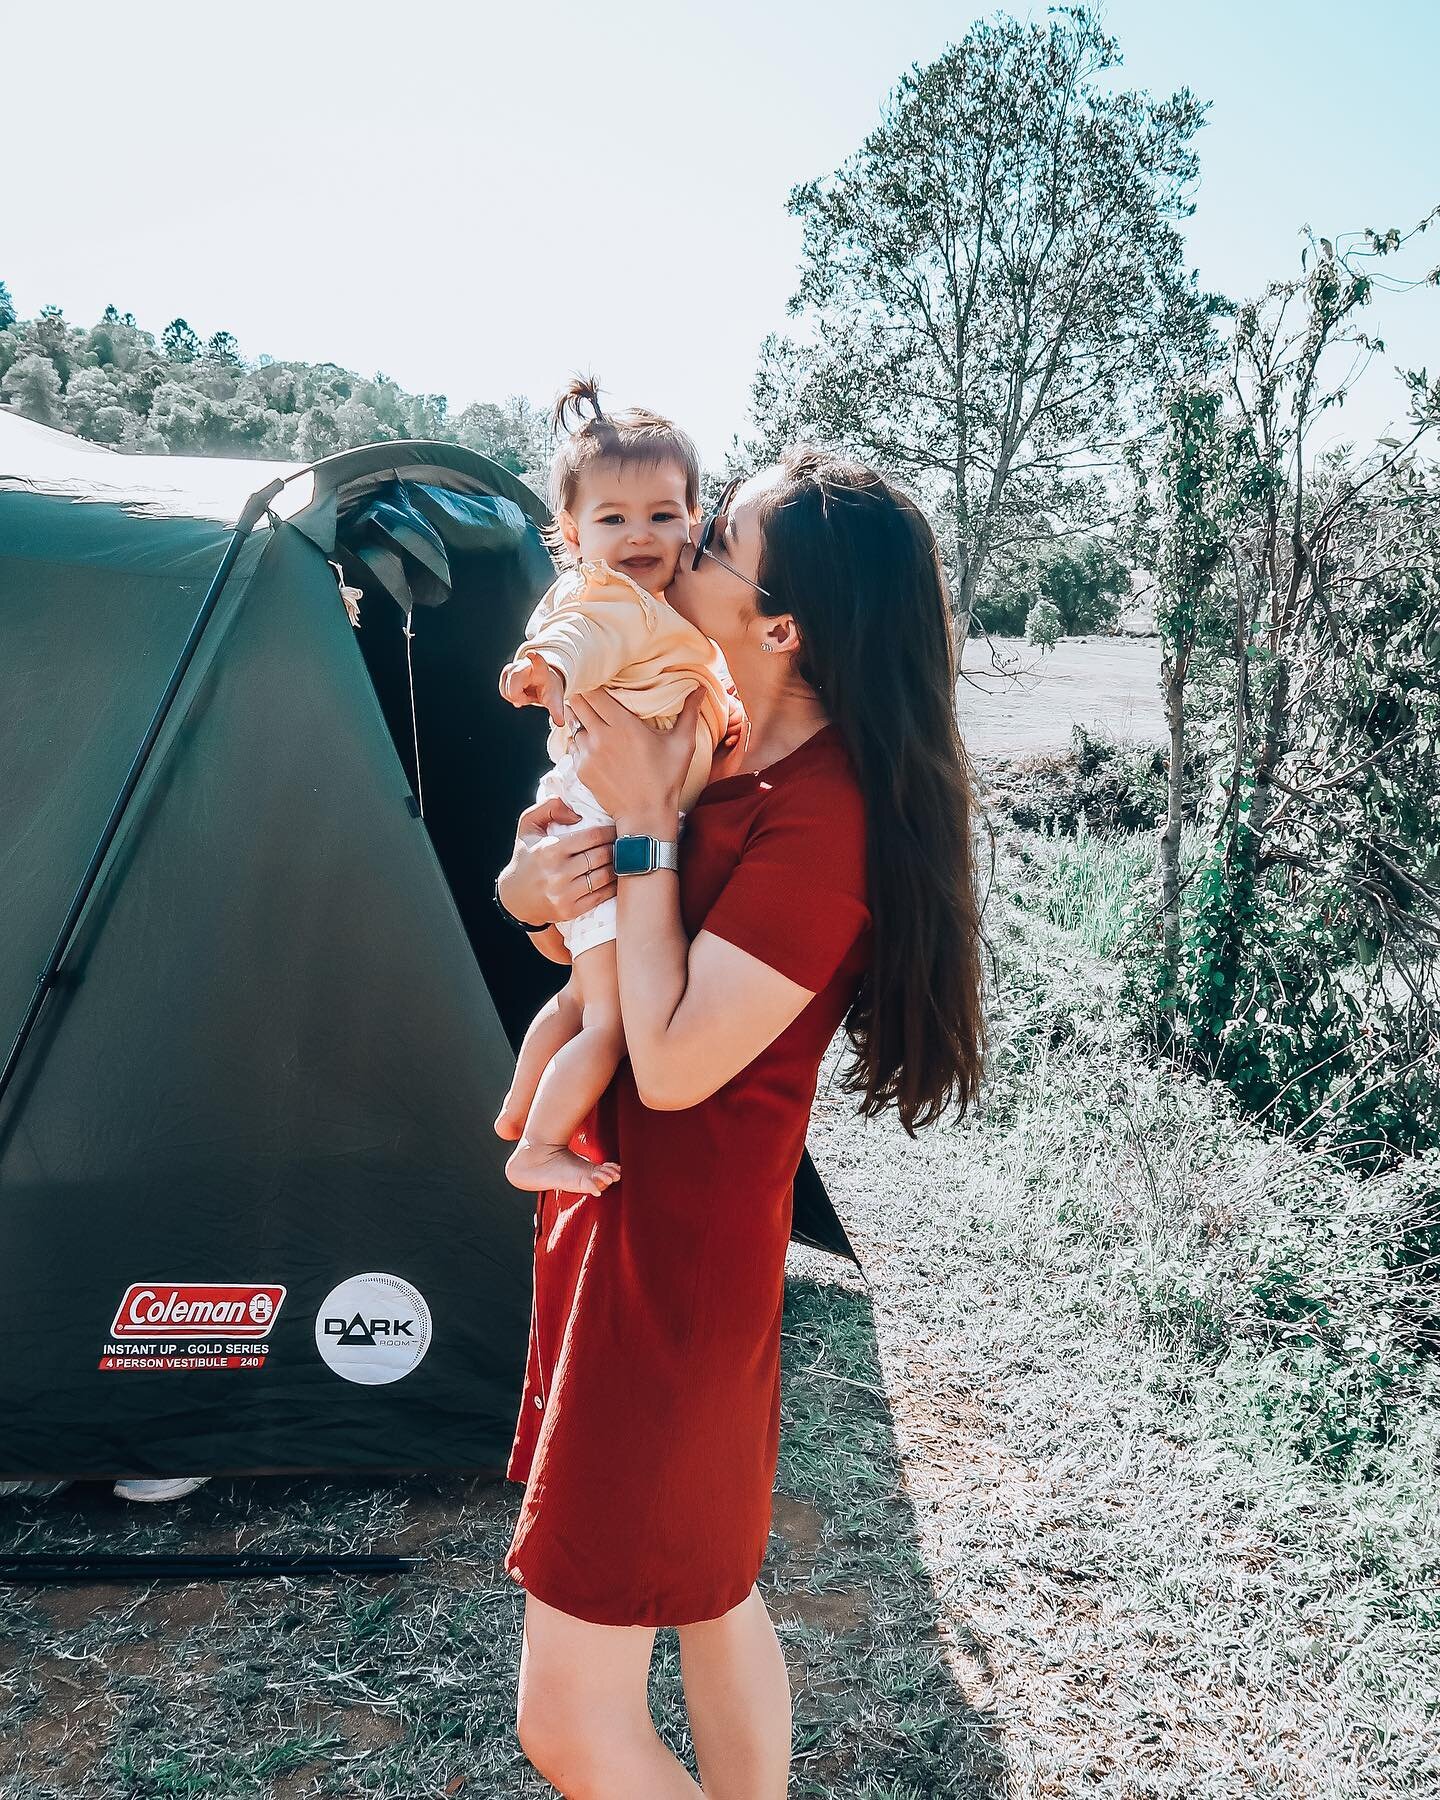 Our camping trip was absolutely amazing but, don&rsquo;t be fooled! These single squares and story snippets are only representing a few seconds in time.  Everything is a little harder with little babies running around 😂

Straight after this was take